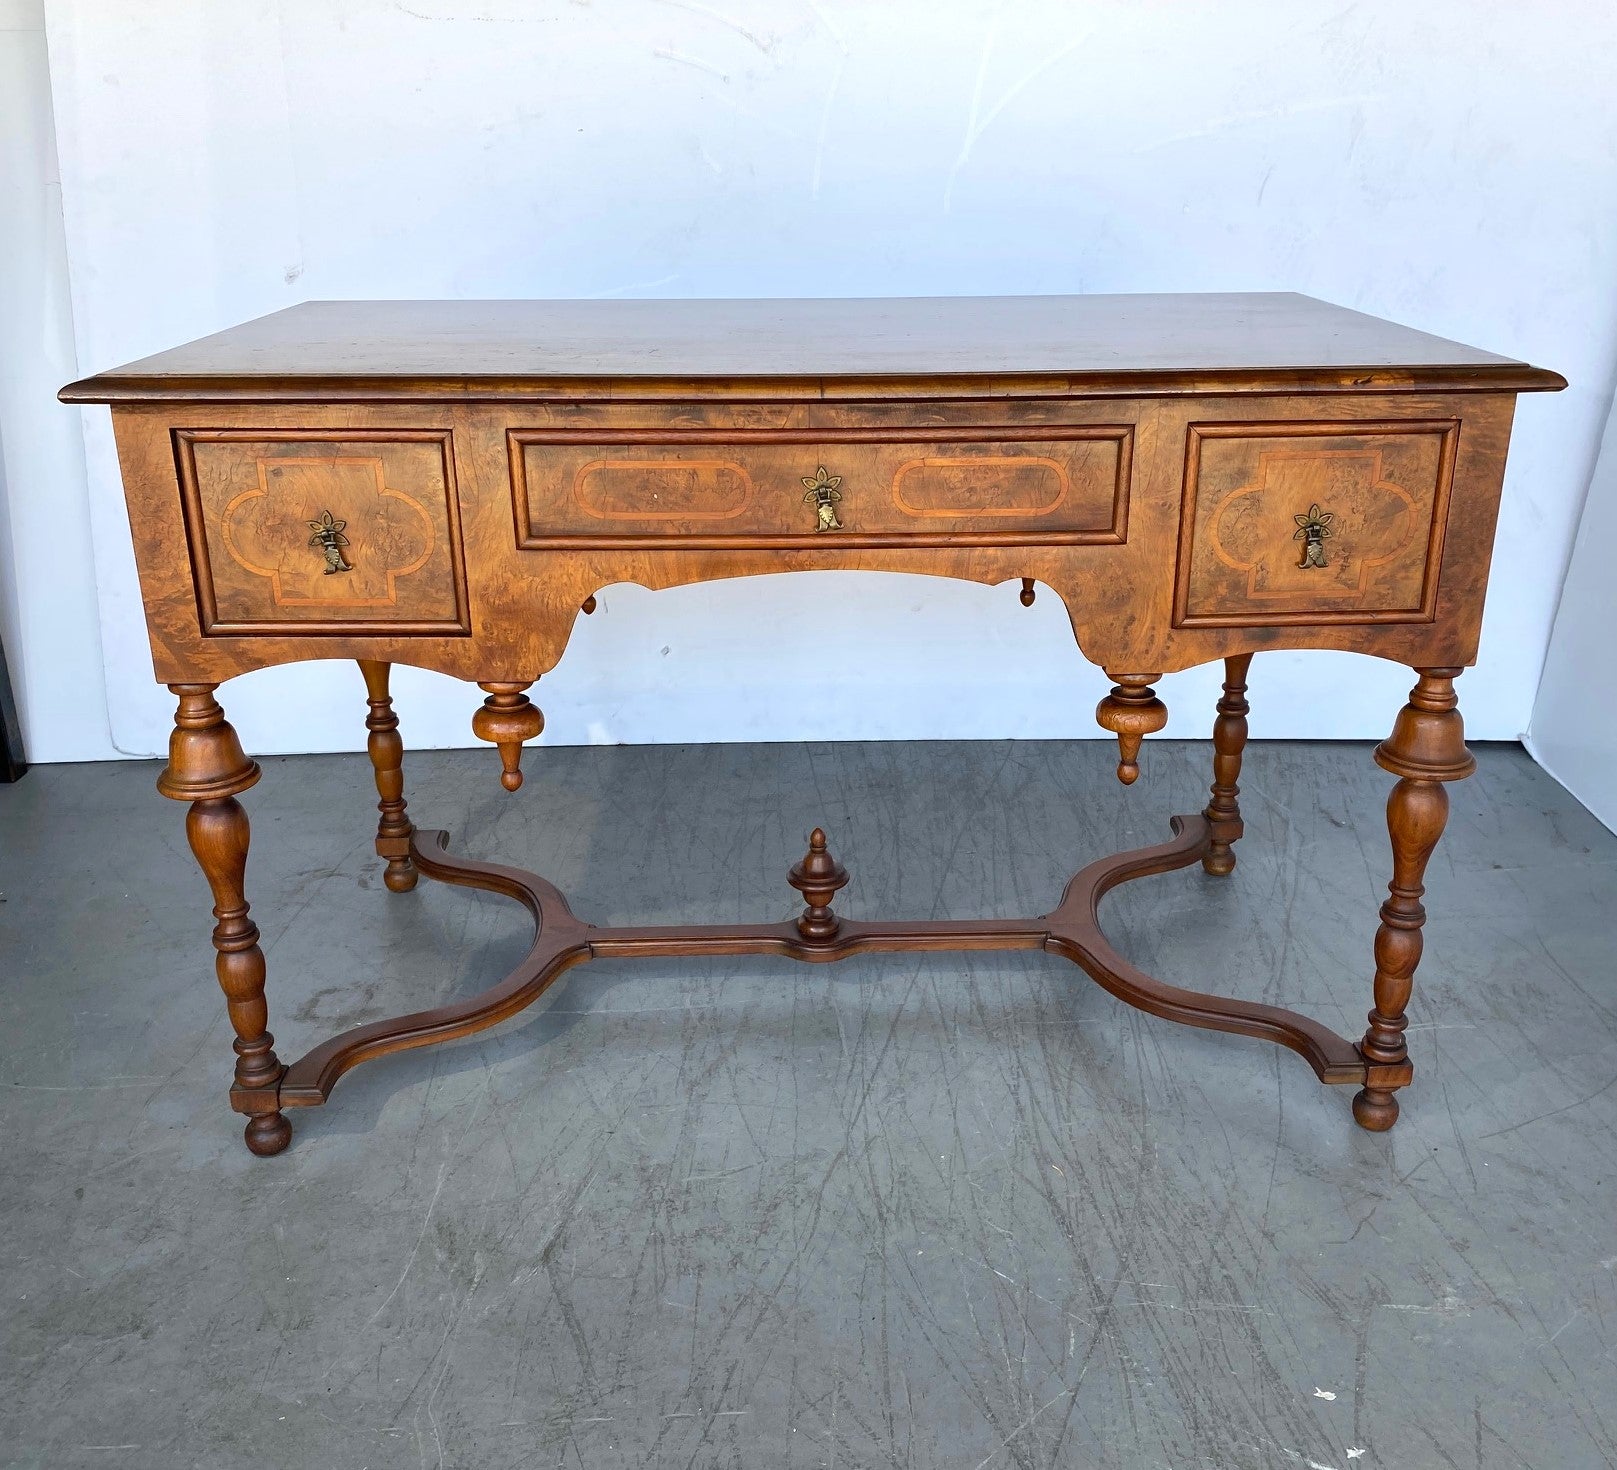 A walnut desk with a burlwood drawer front and on the sides. Willaim and Mary style made by John A Colby.